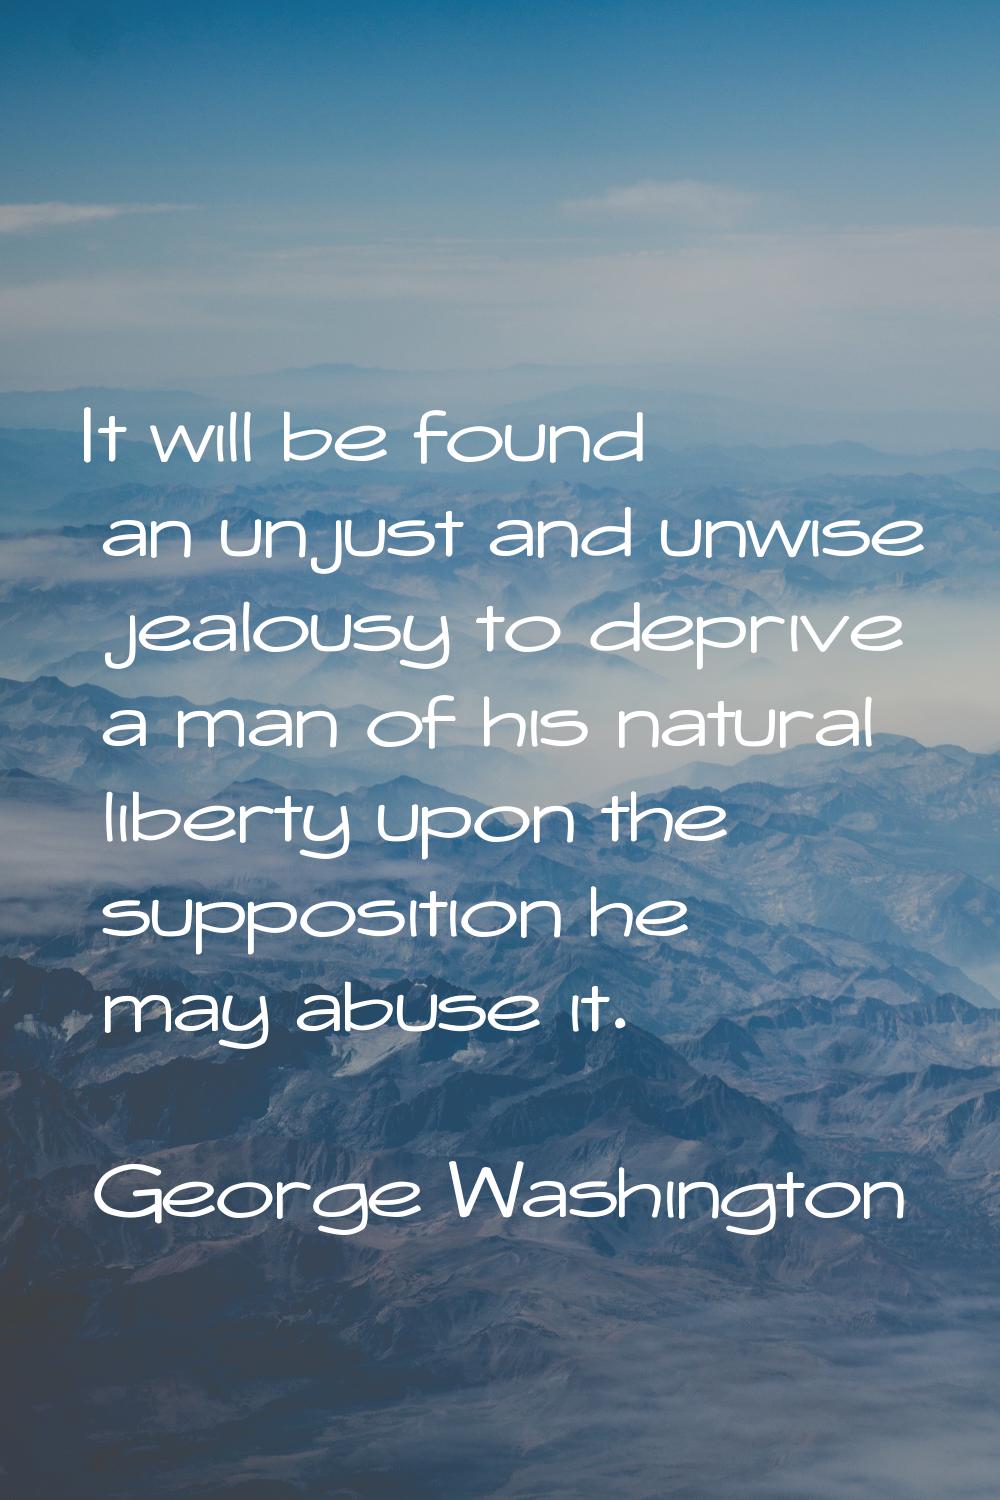 It will be found an unjust and unwise jealousy to deprive a man of his natural liberty upon the sup